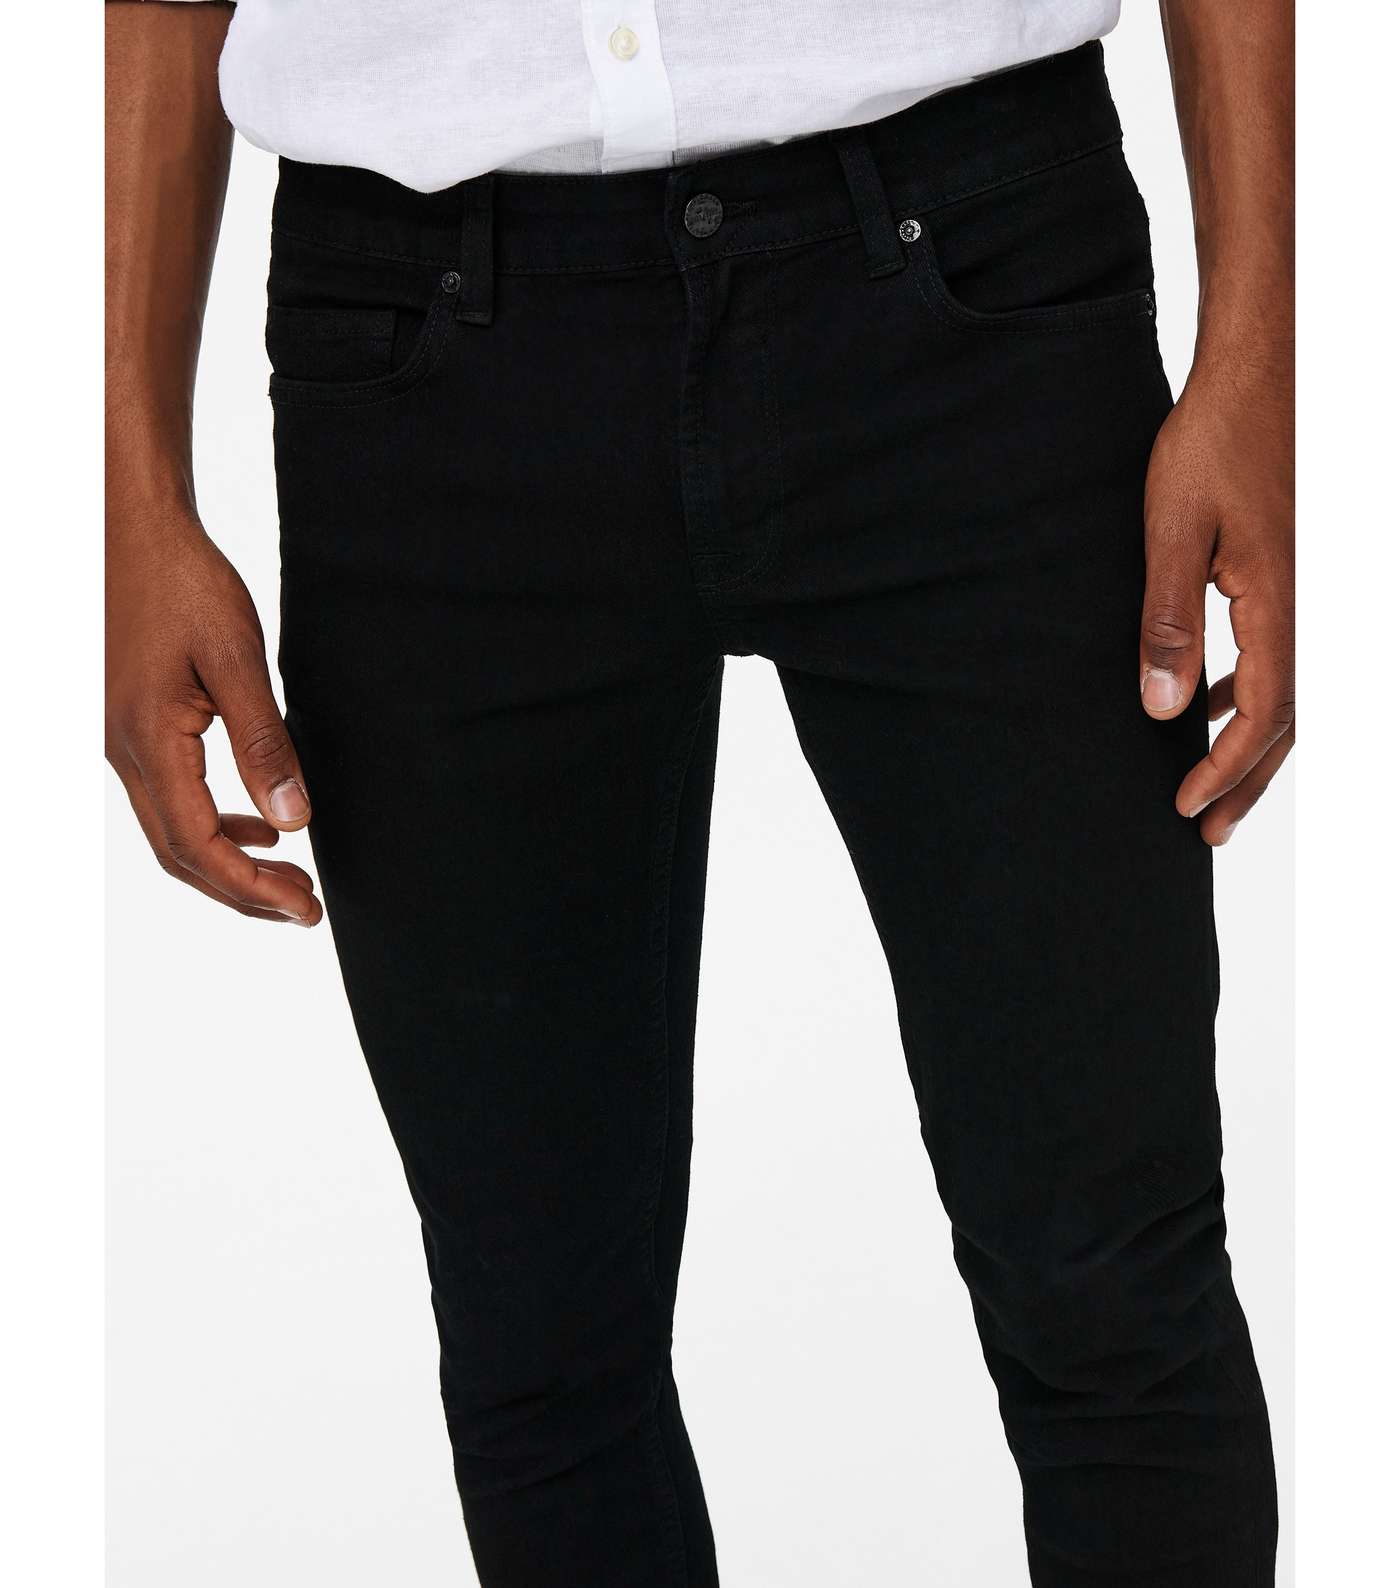 Only & Sons Black Skinny Jeans Image 4